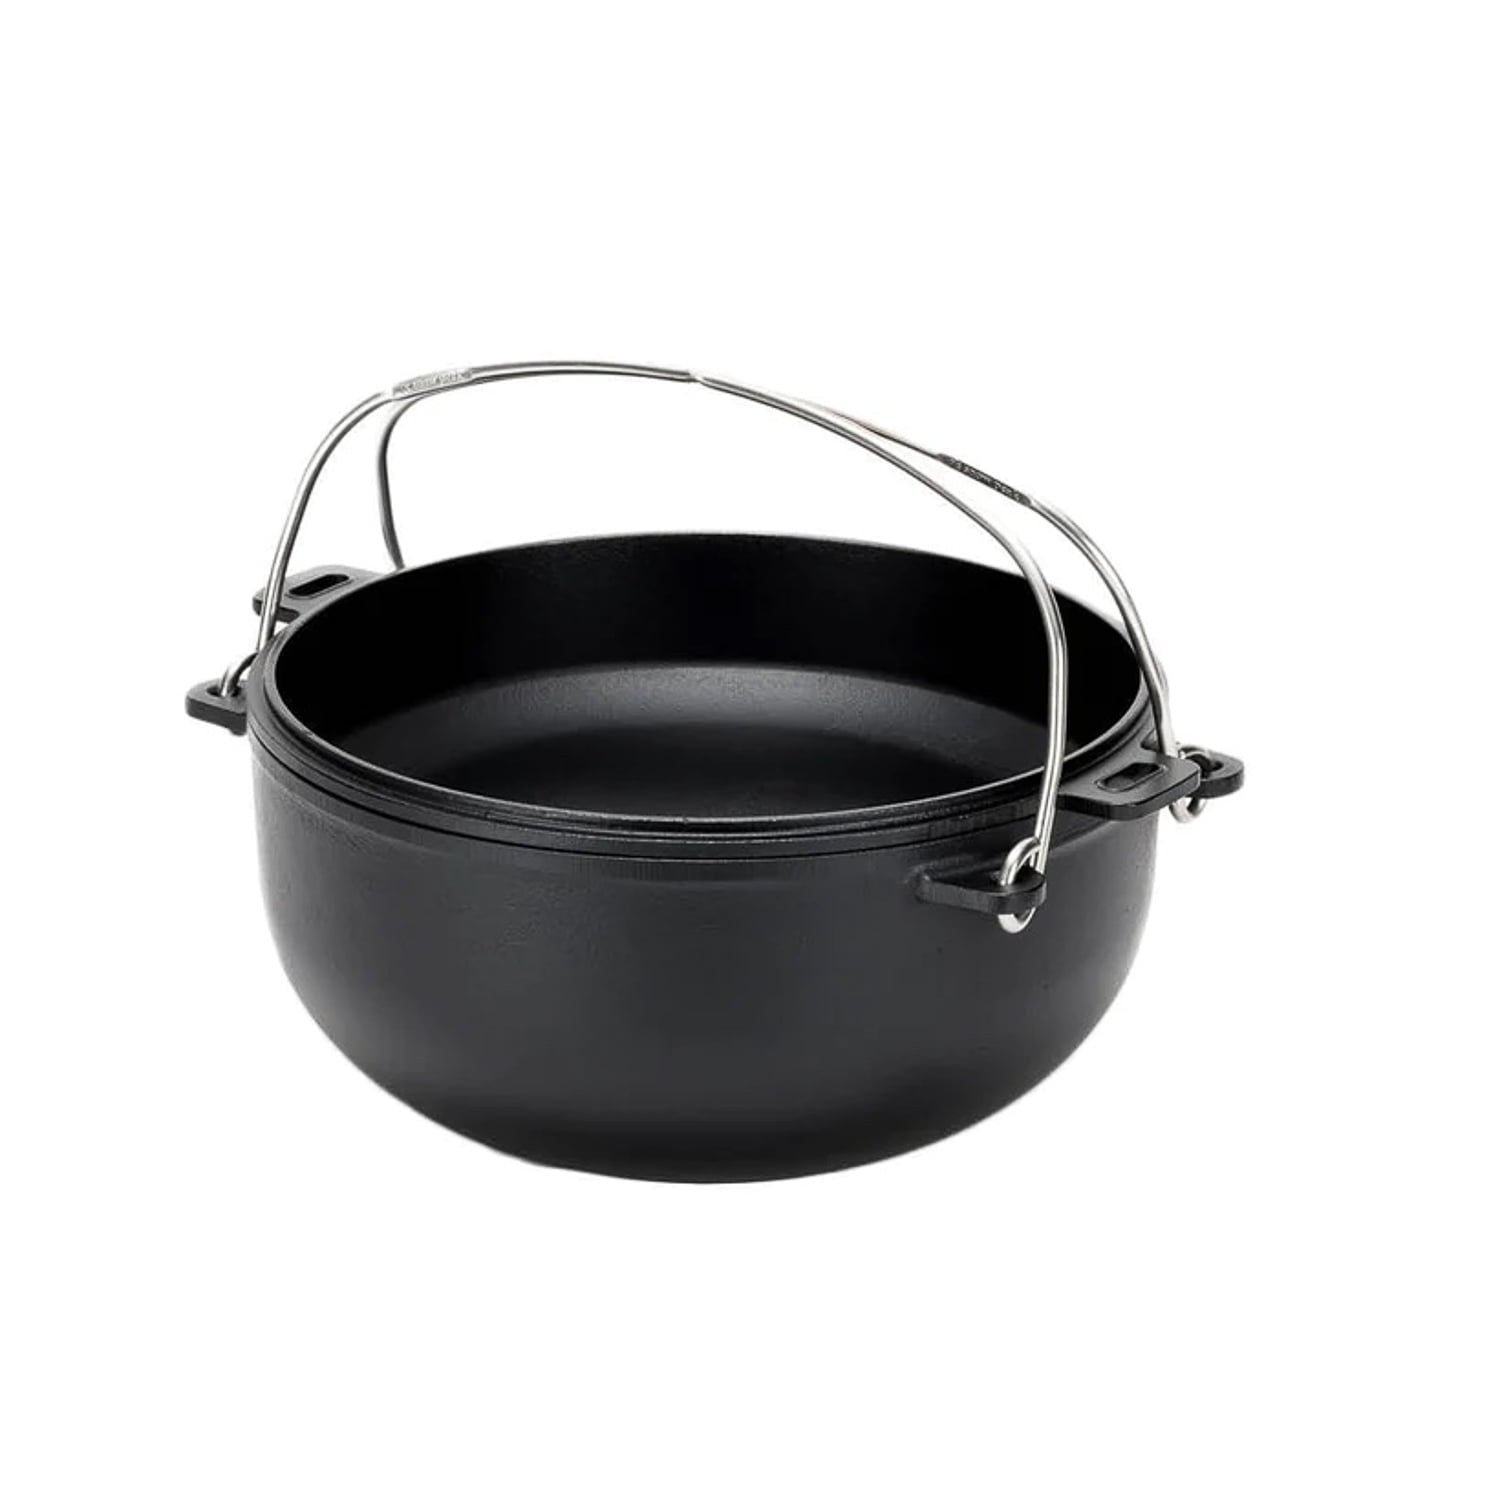 Camp Oven Comparison - Dutch Oven vs. The Coleman Camp Oven — The